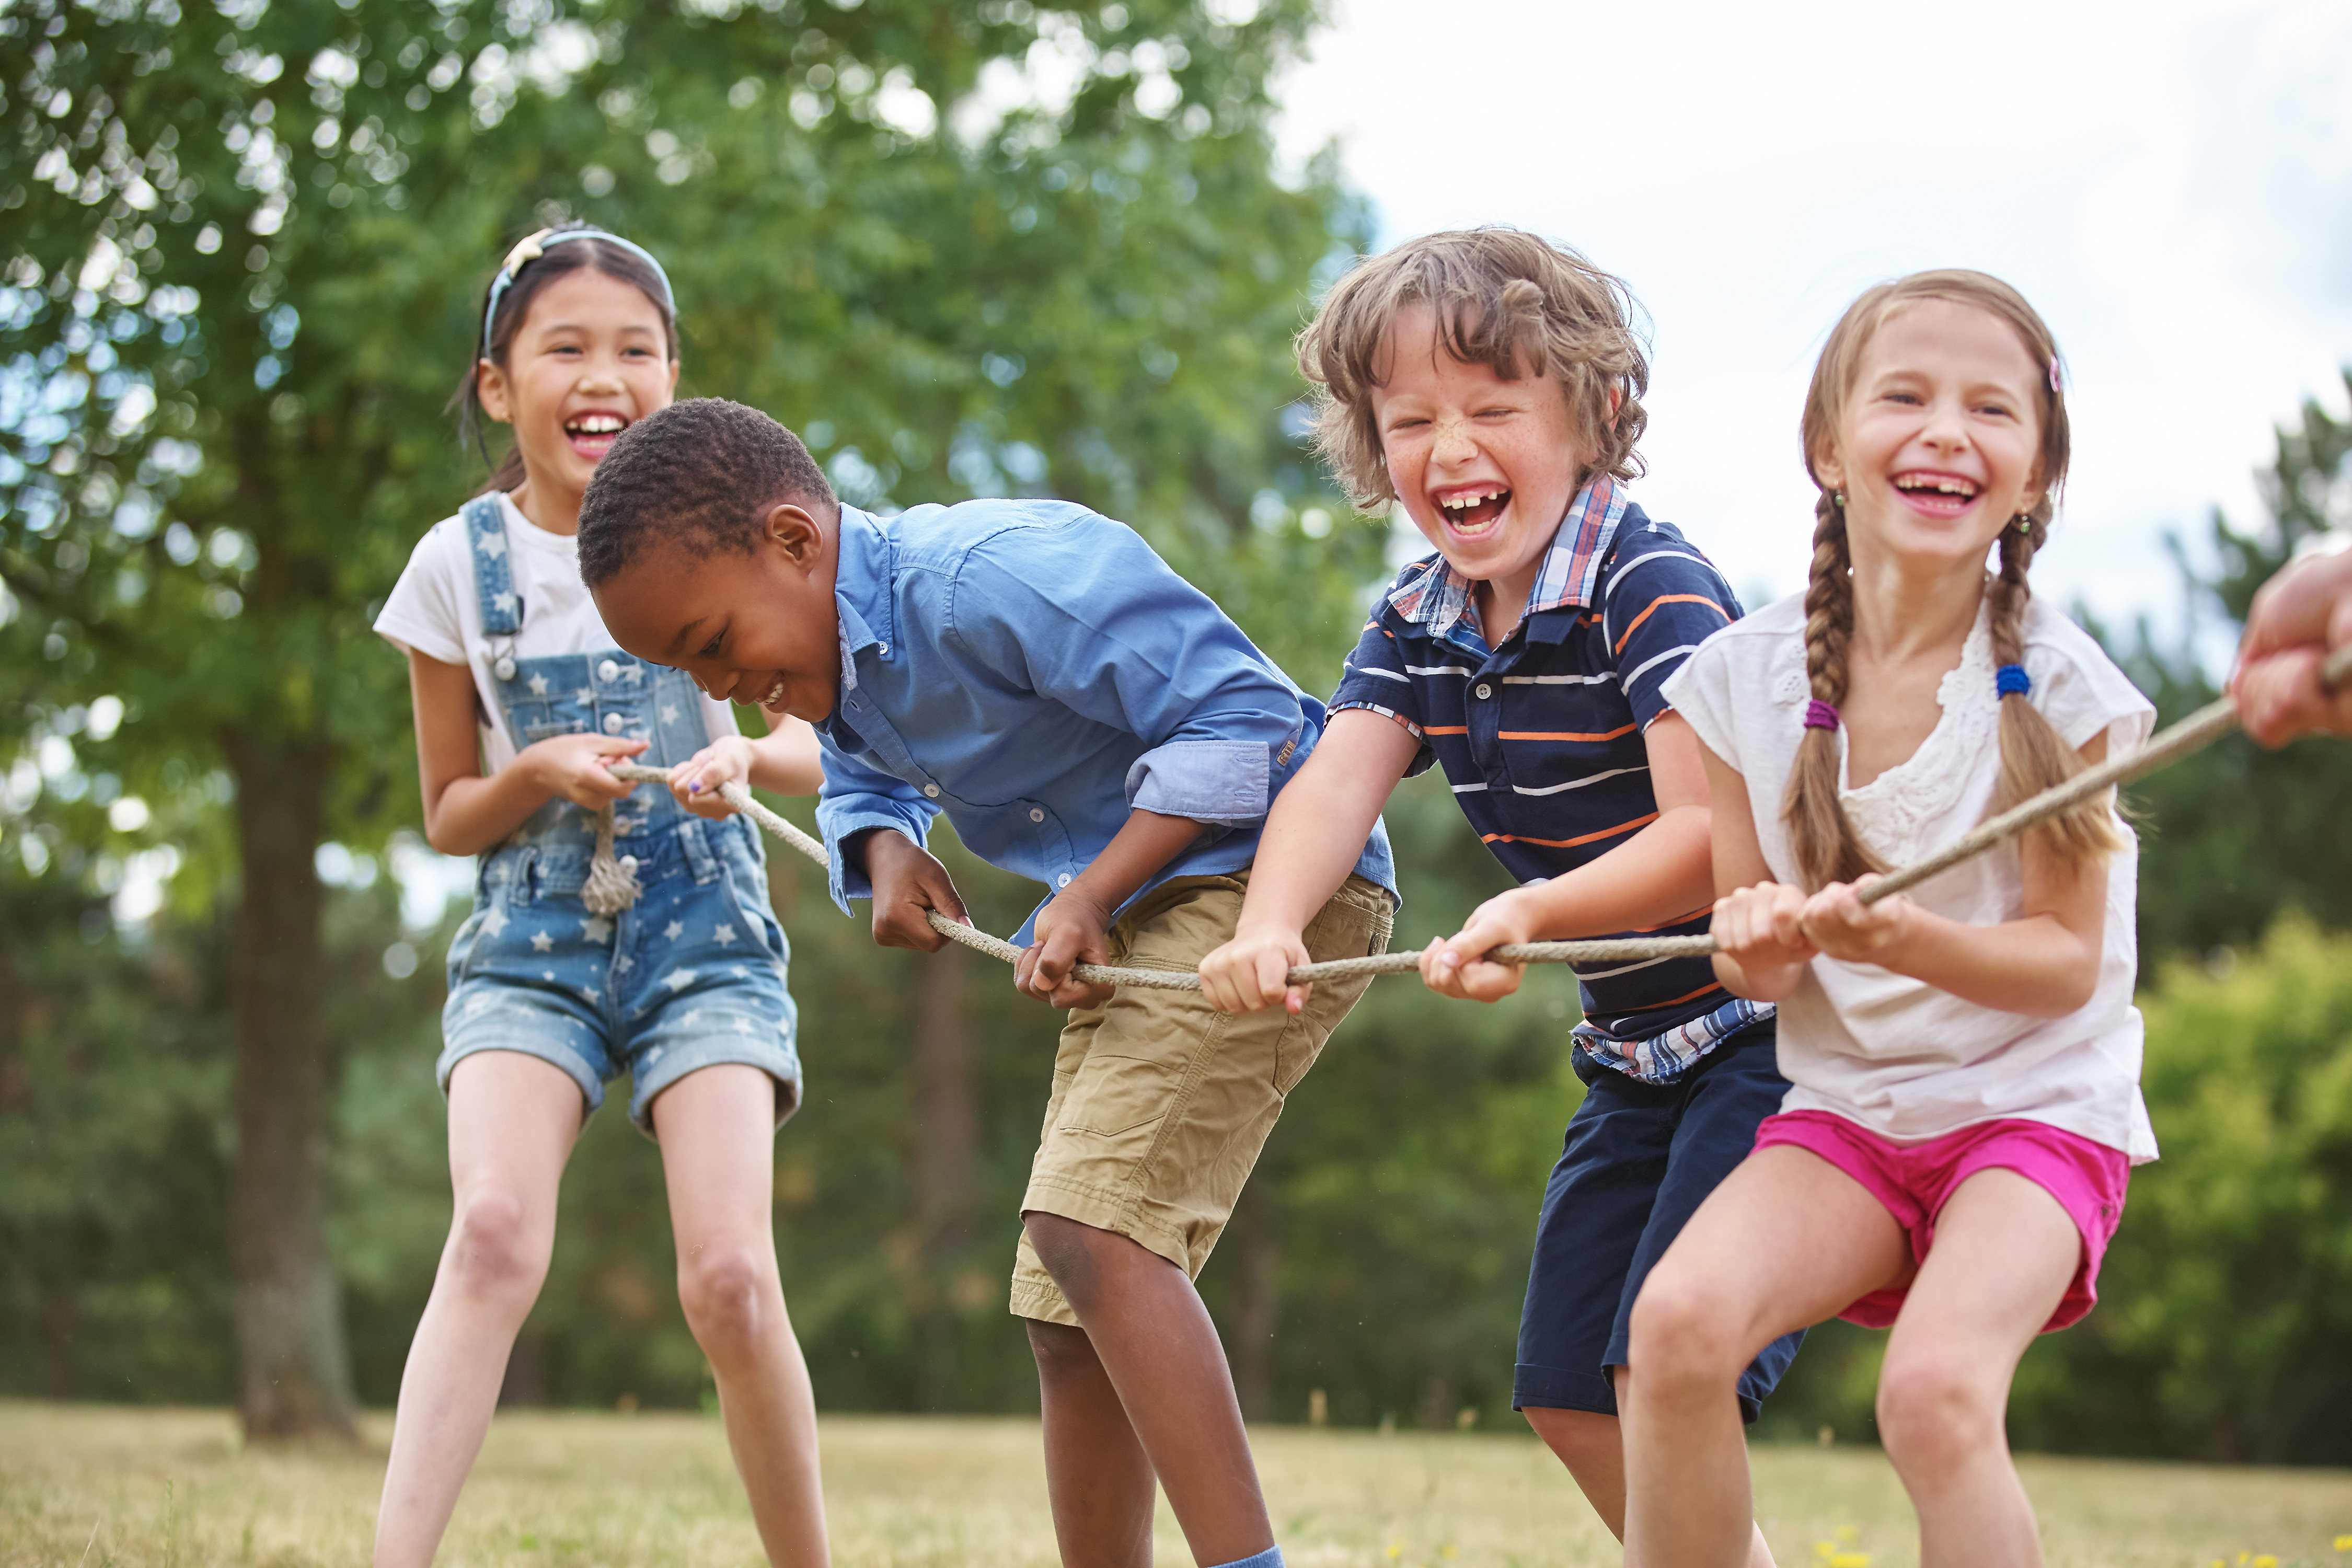 Children laughing and playing tug of war at the park